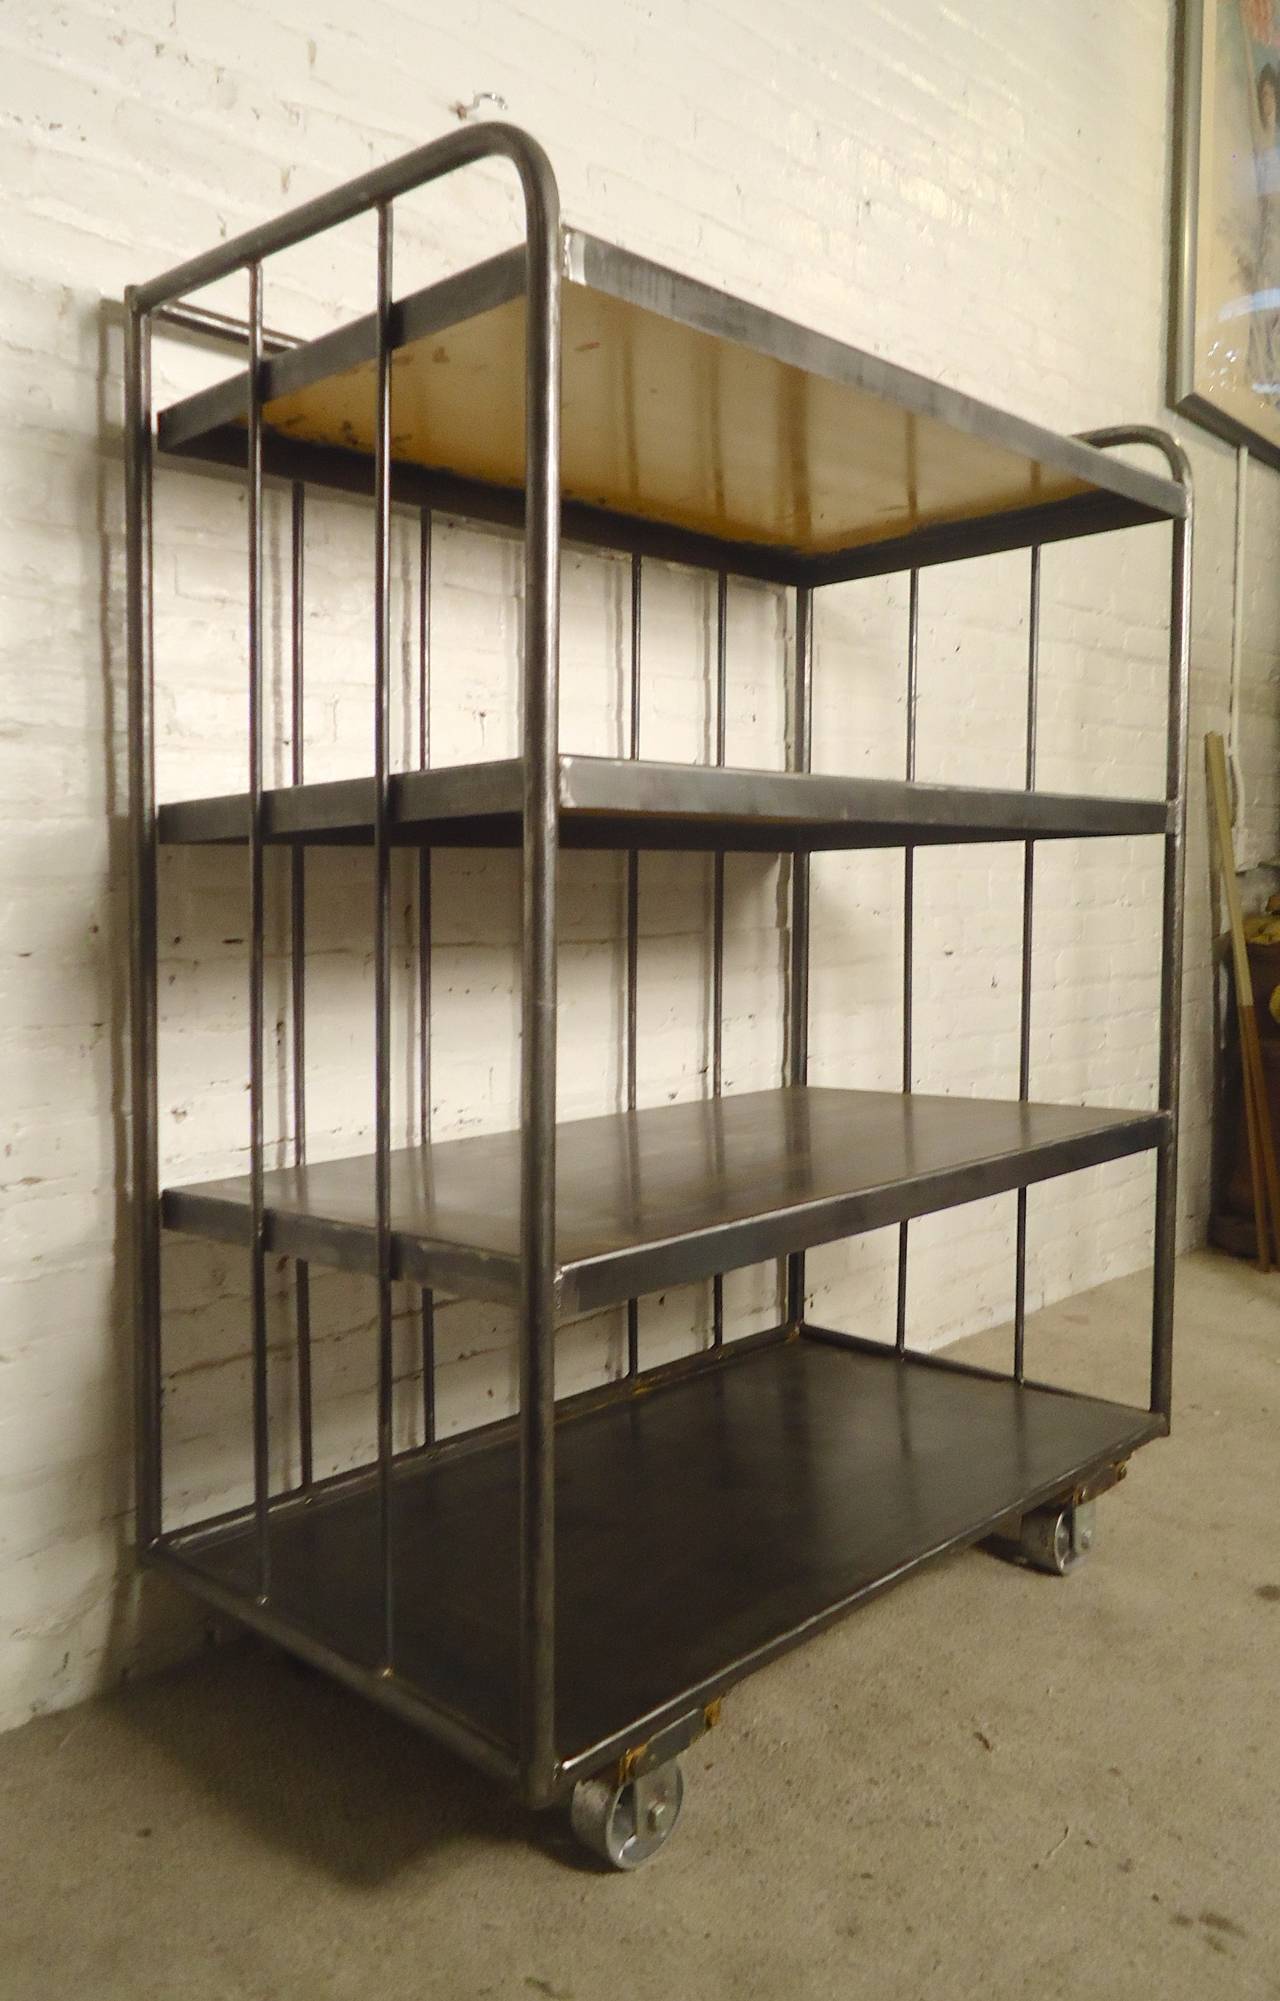 Very large and very heavy rolling cart with four wide shelves. Stripped down and lacquered for a fresh industrial look. Makes for a great bookcase.

(Please confirm item location - NY or NJ - with dealer)